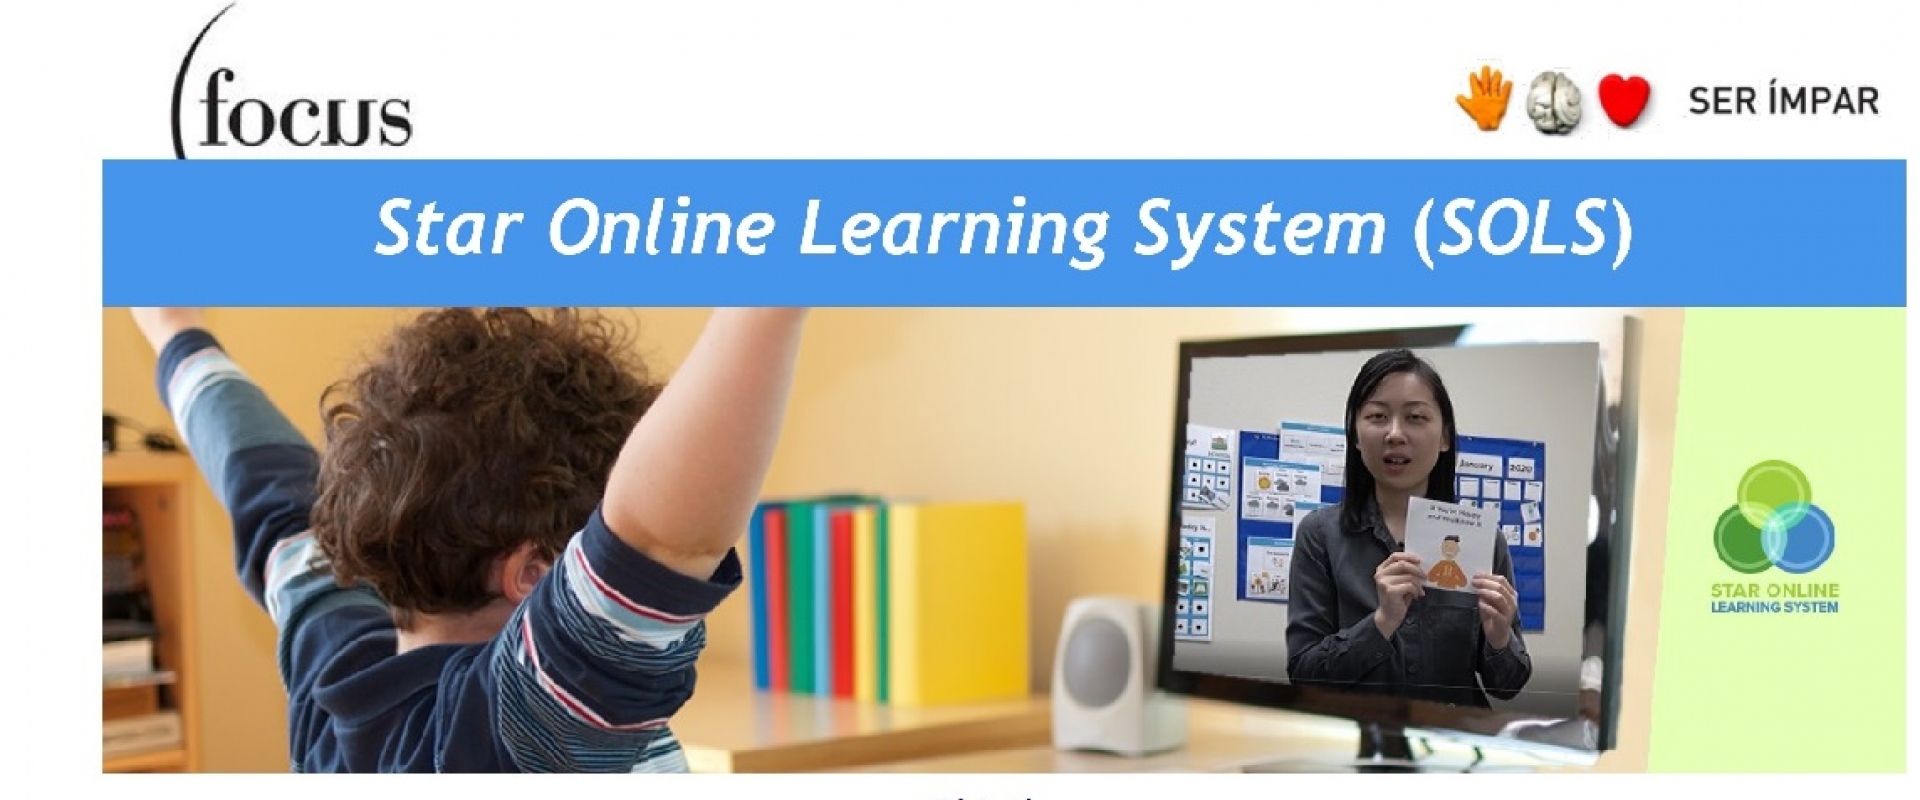 SOLS - Star Online Learning System